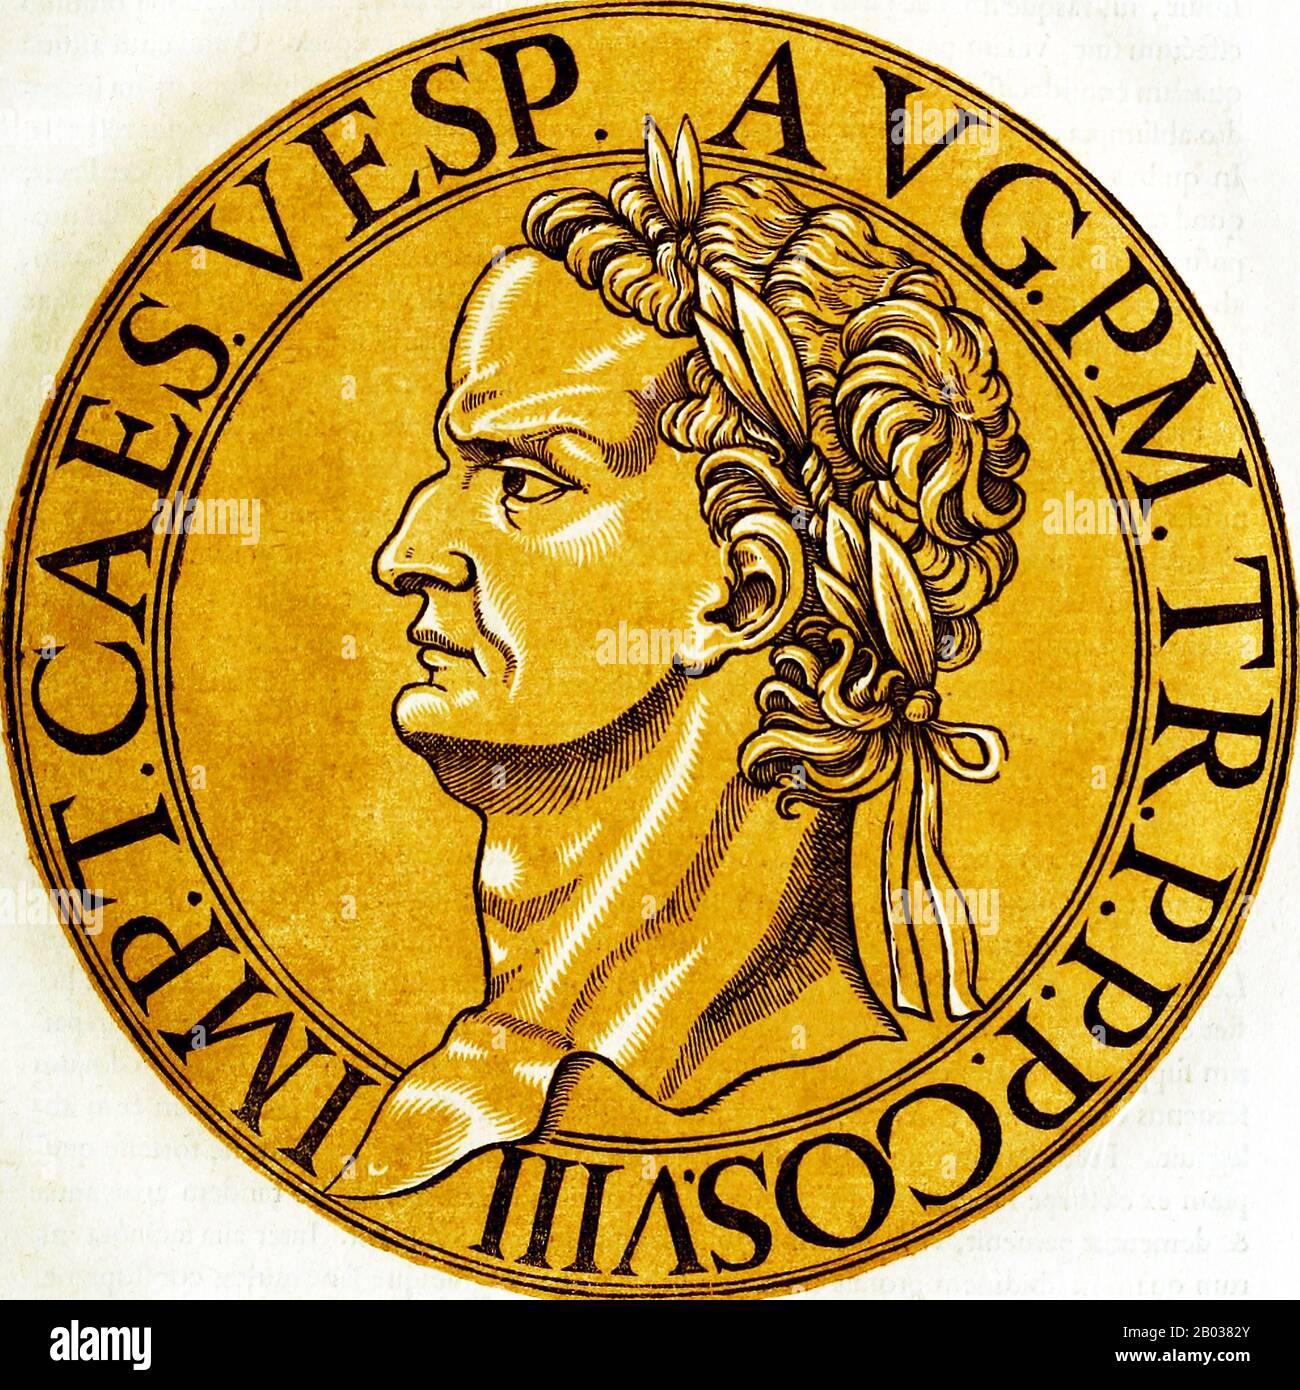 Natural son and heir of Emperor Vespasian, Titus (39-81 CE) was a member of the Flavian dynasty, the first Roman emperor to succeed his own biological father. Titus, like his father, had earned much renown as a military commander, especially during the First Jewish-Roman war.  When his father left to claim the imperial throne after Nero's death, Titus was left behind to end the Jewish rebellion, which occurred in 70 CE with the siege and sacking of Jerusalem. The Arch of Titus was built in honour of his destruction of the city. He was also known for his controversial relationship with the Jewi Stock Photo